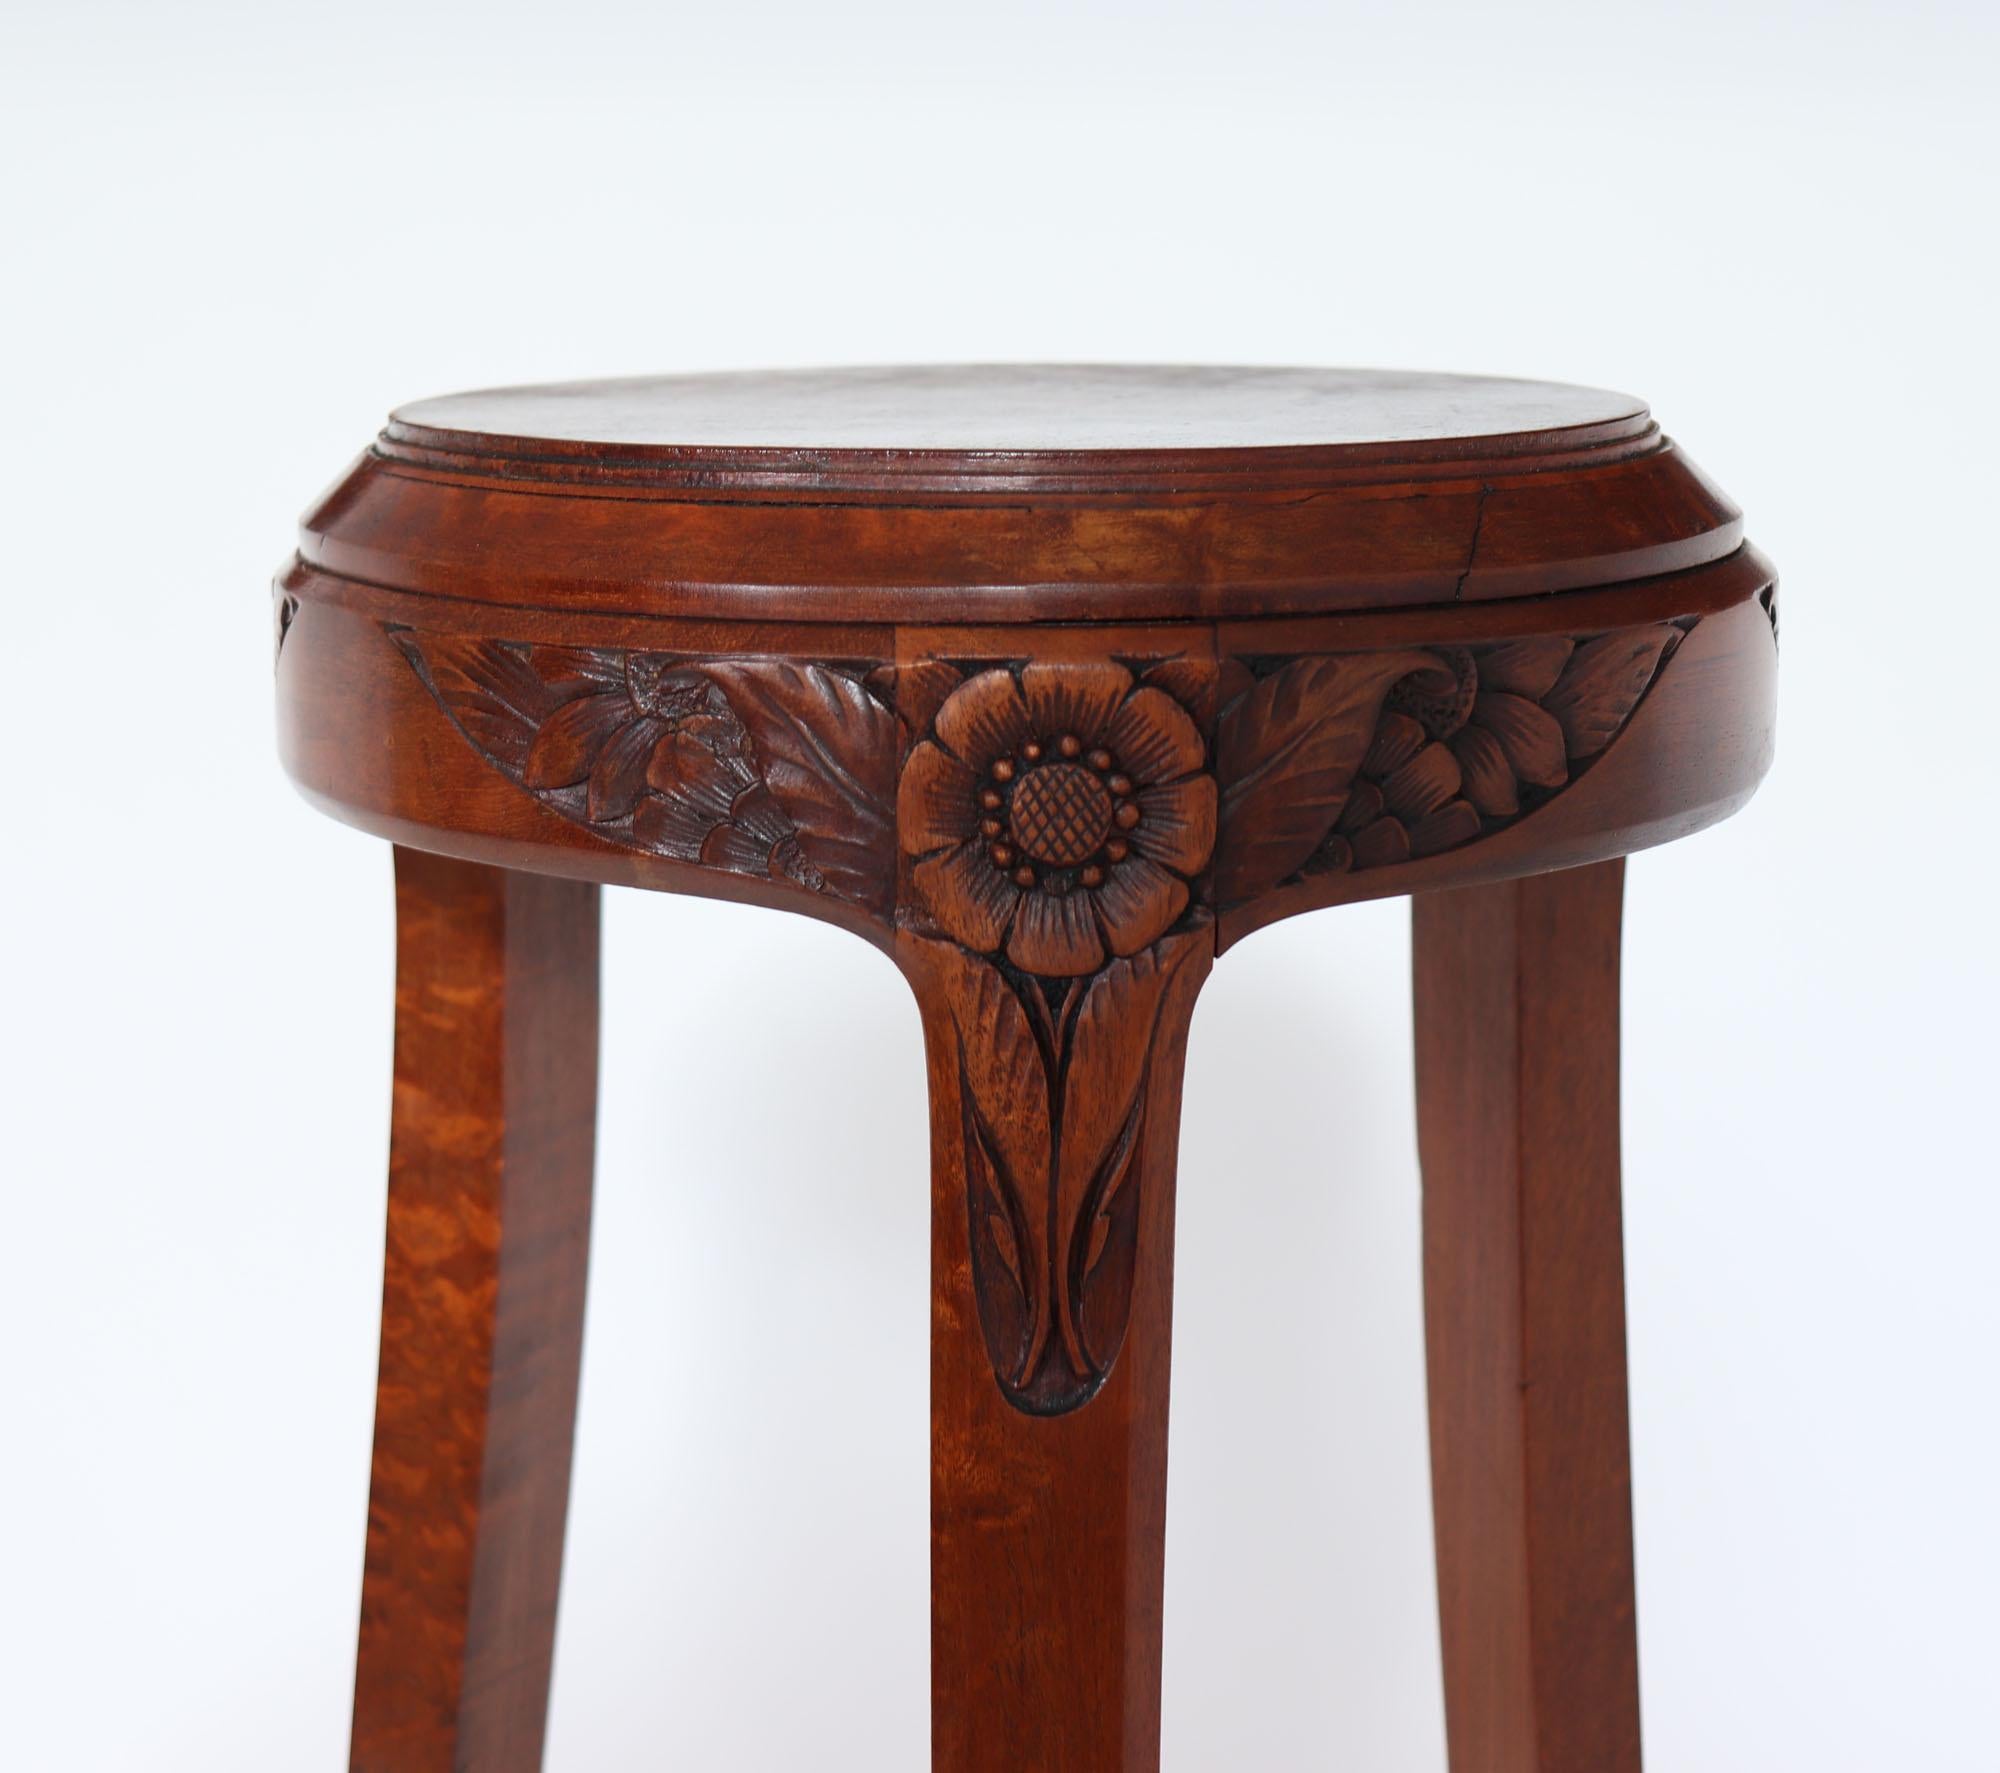 A stunning tall plant stand in solid pomelle sapele, by Paul Follot c1925, it has a circular top with three legs supporting a triangular shelf, at the top of each leg there are crisply carved flowers in bird form, each one unique. The table is in